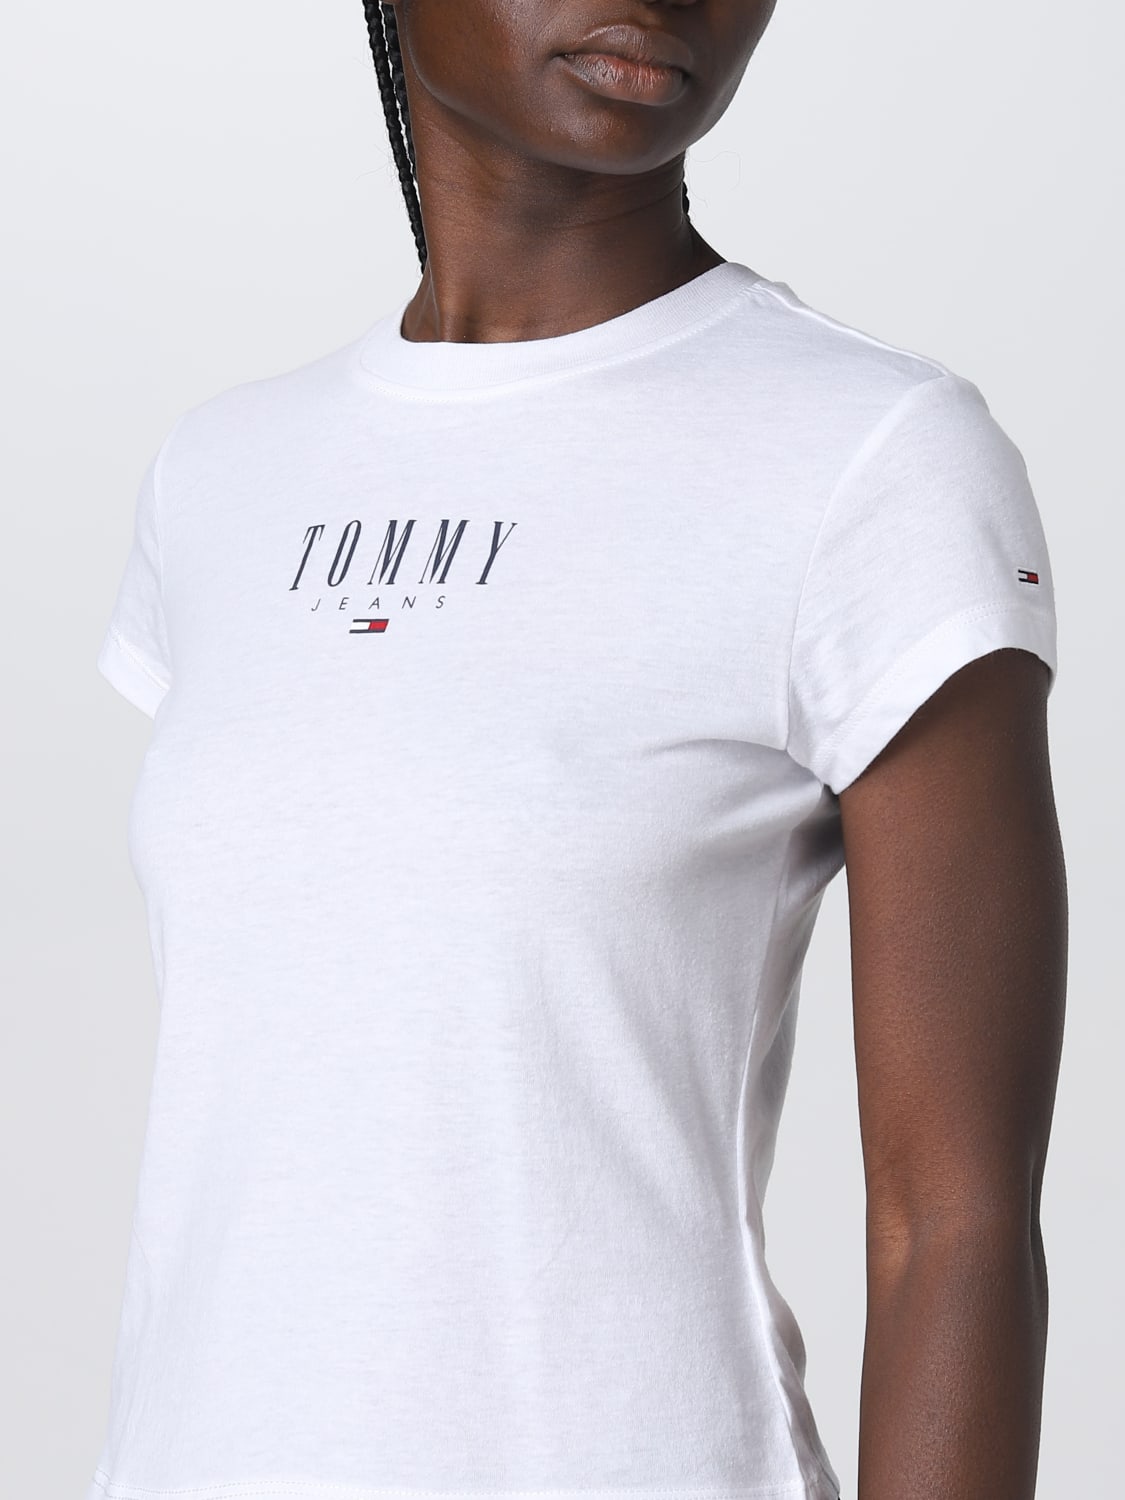 TOMMY JEANS: t-shirt for woman - White | Tommy Jeans t-shirt DW0DW15749  online at